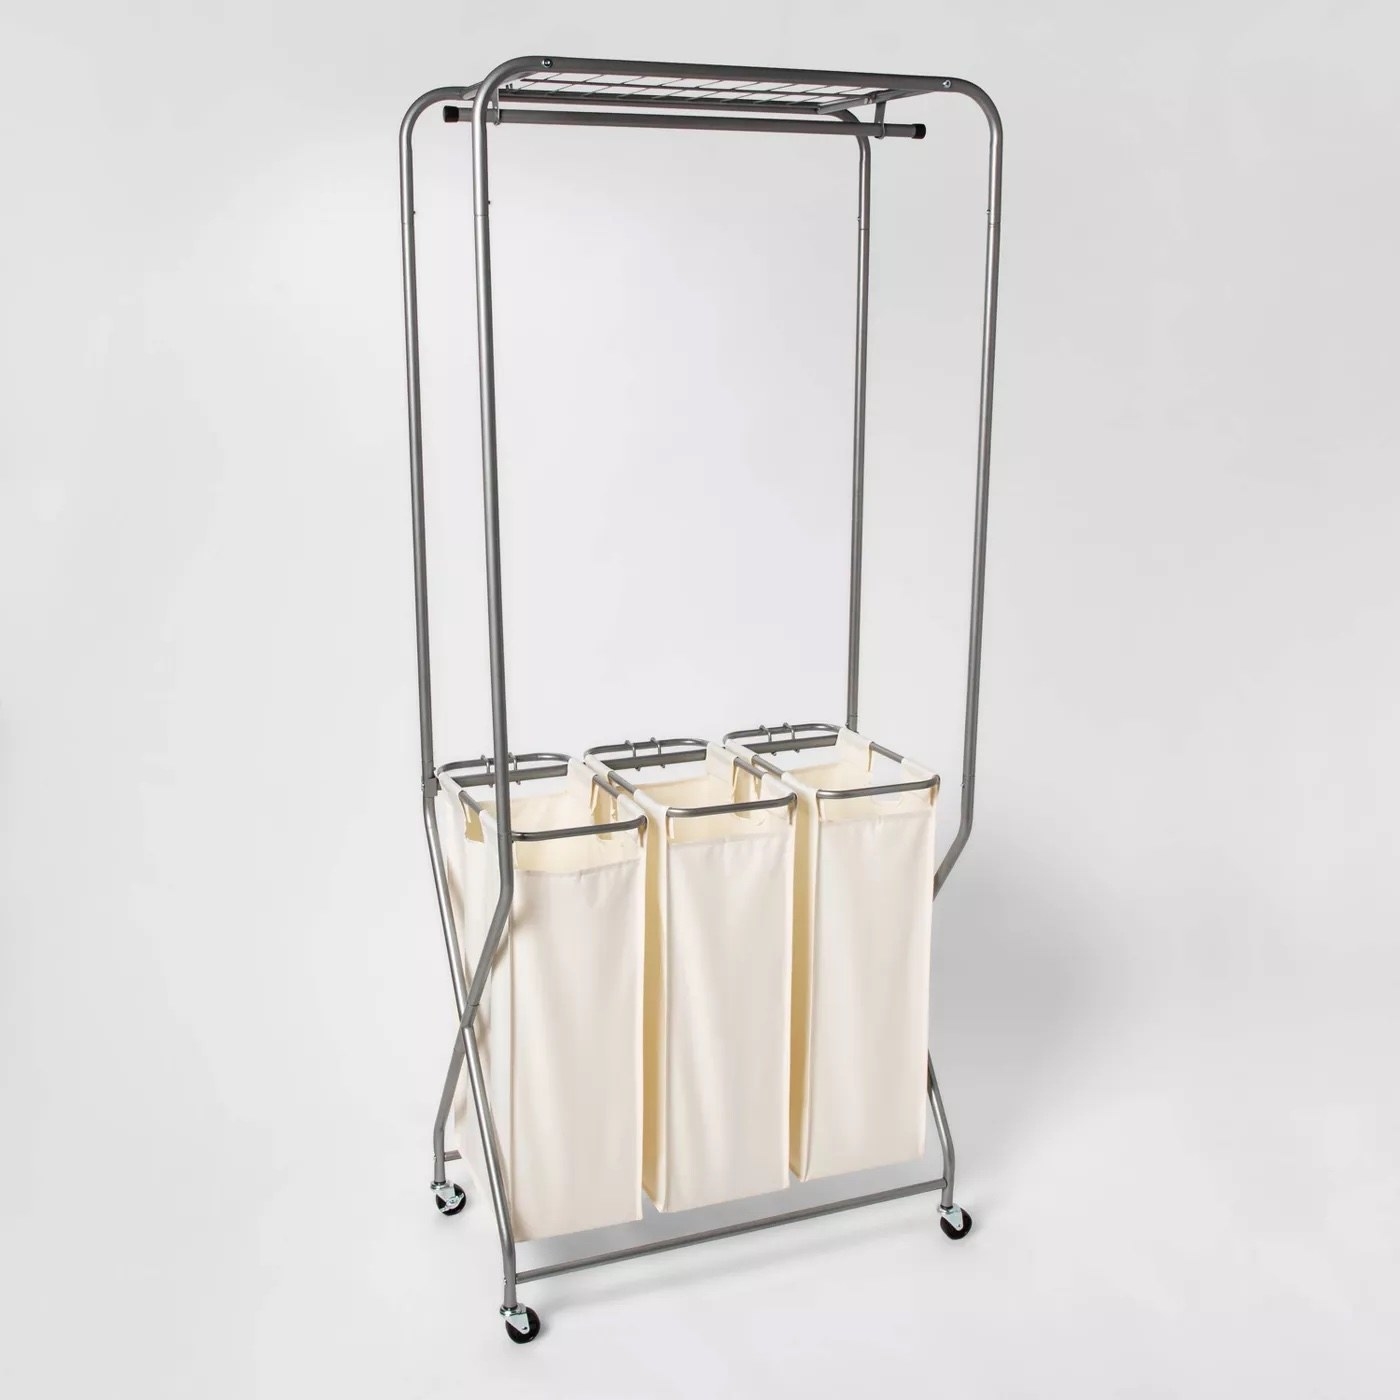 A metal laundry station with sorting bags.